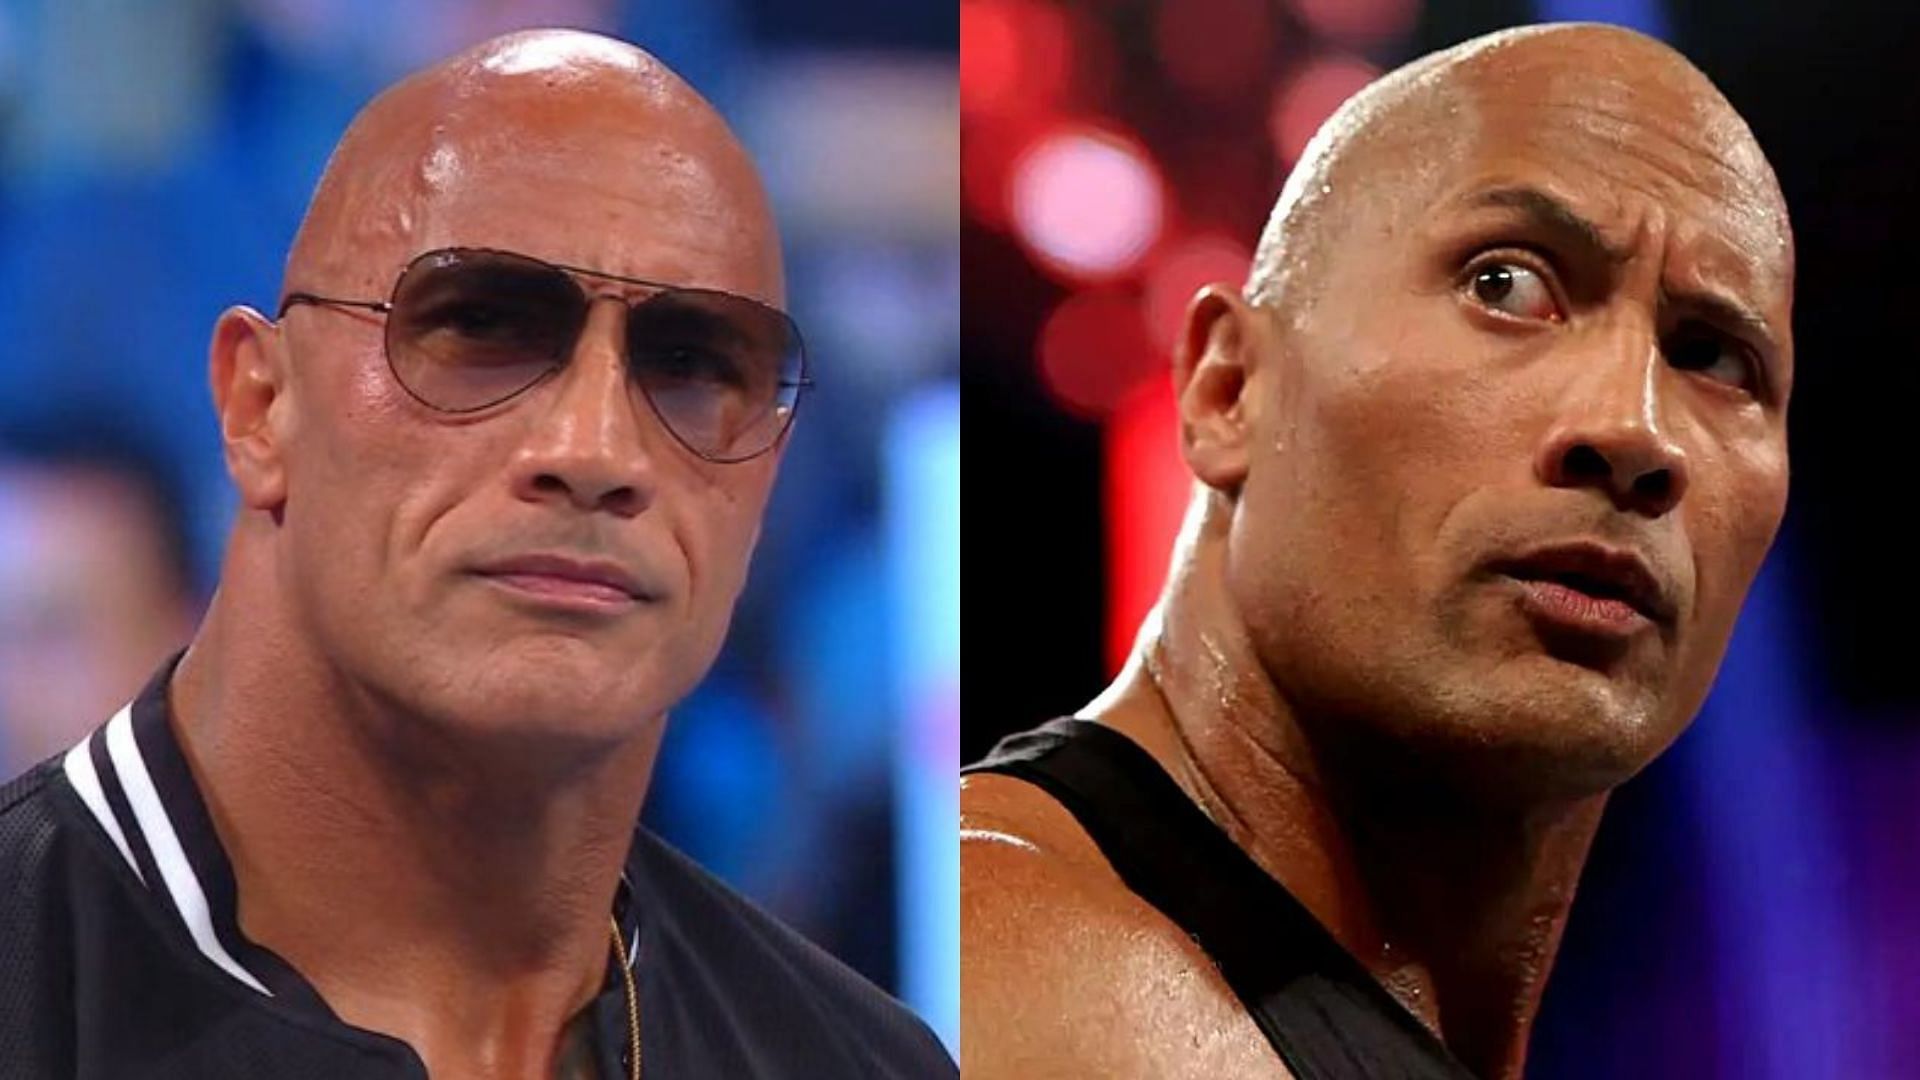 The Rock recently returned on SmackDown.